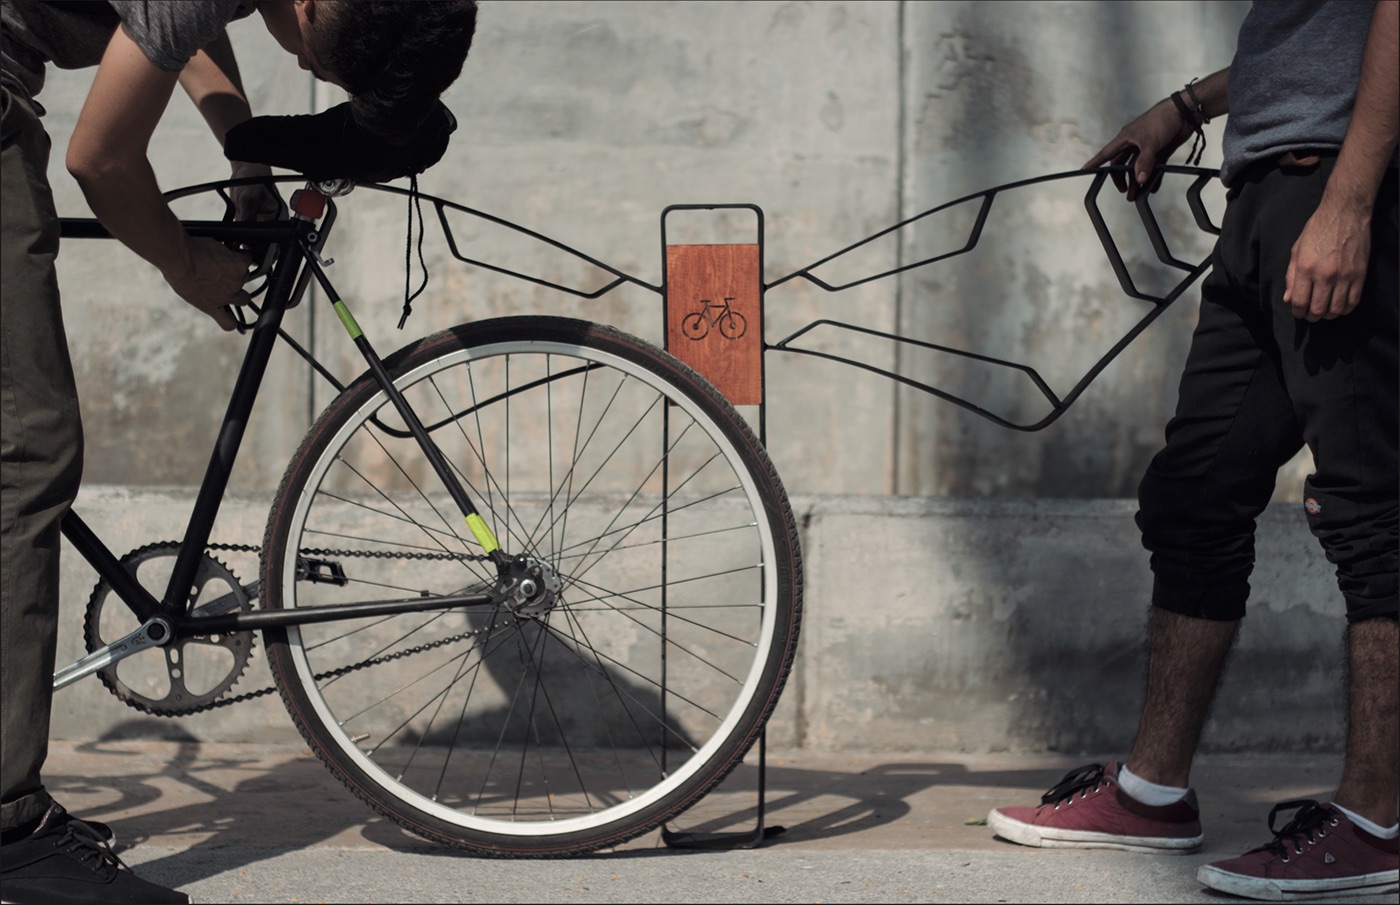 design mobility Urban product mobiliary Bike